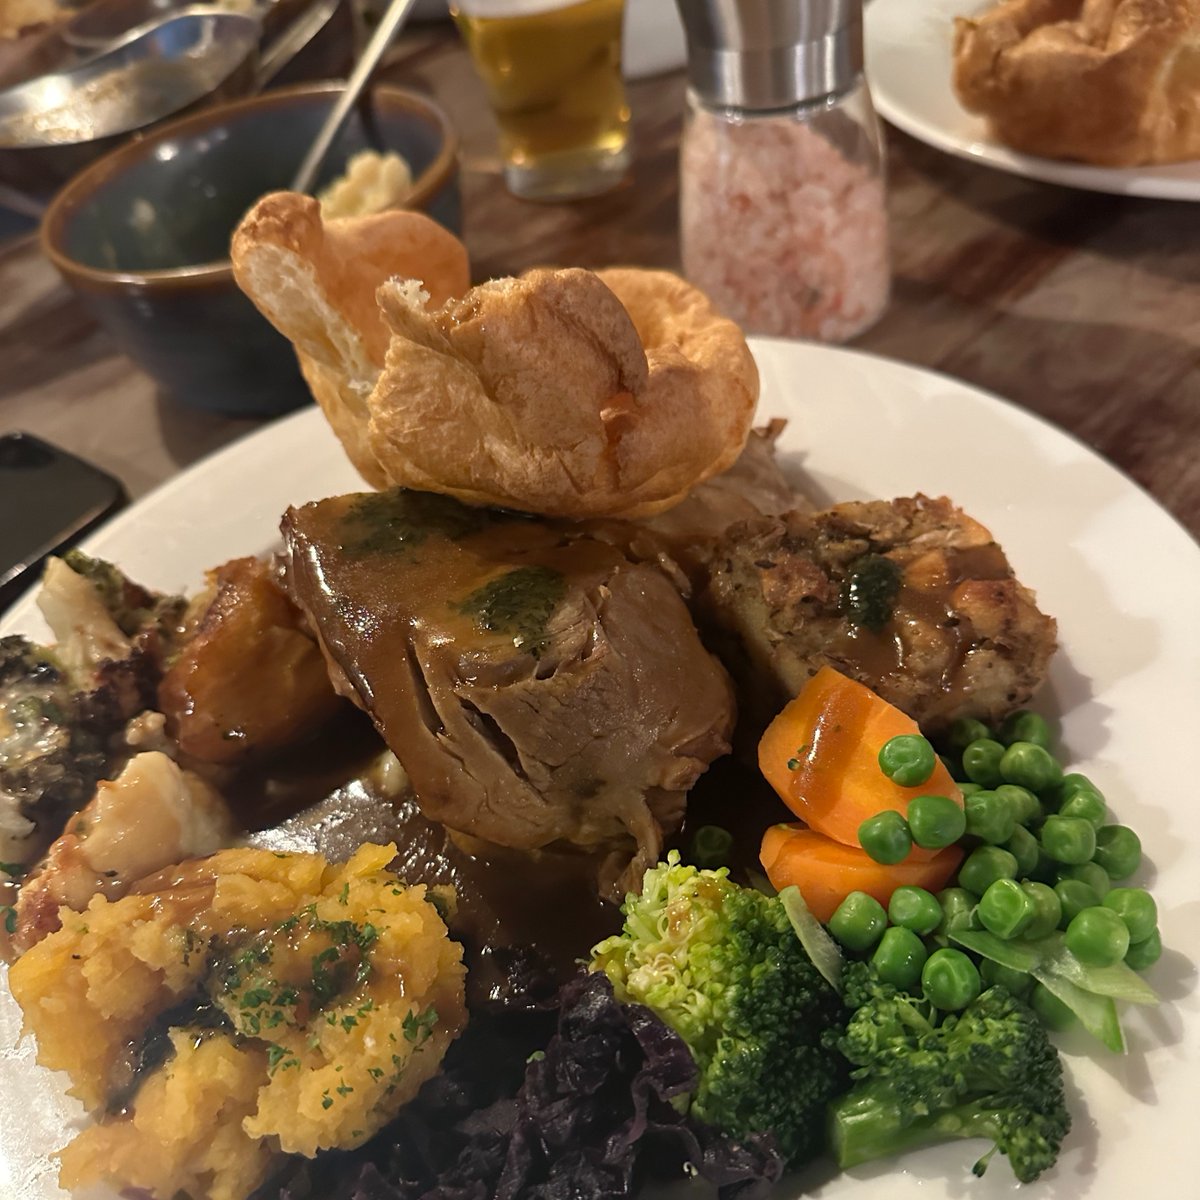 Are you joining us for the last Sunday roast of the season? Sunday lunches will cease from Easter Sunday so get booked in for your last fix! 🐥🌷 #SpringHasSprung